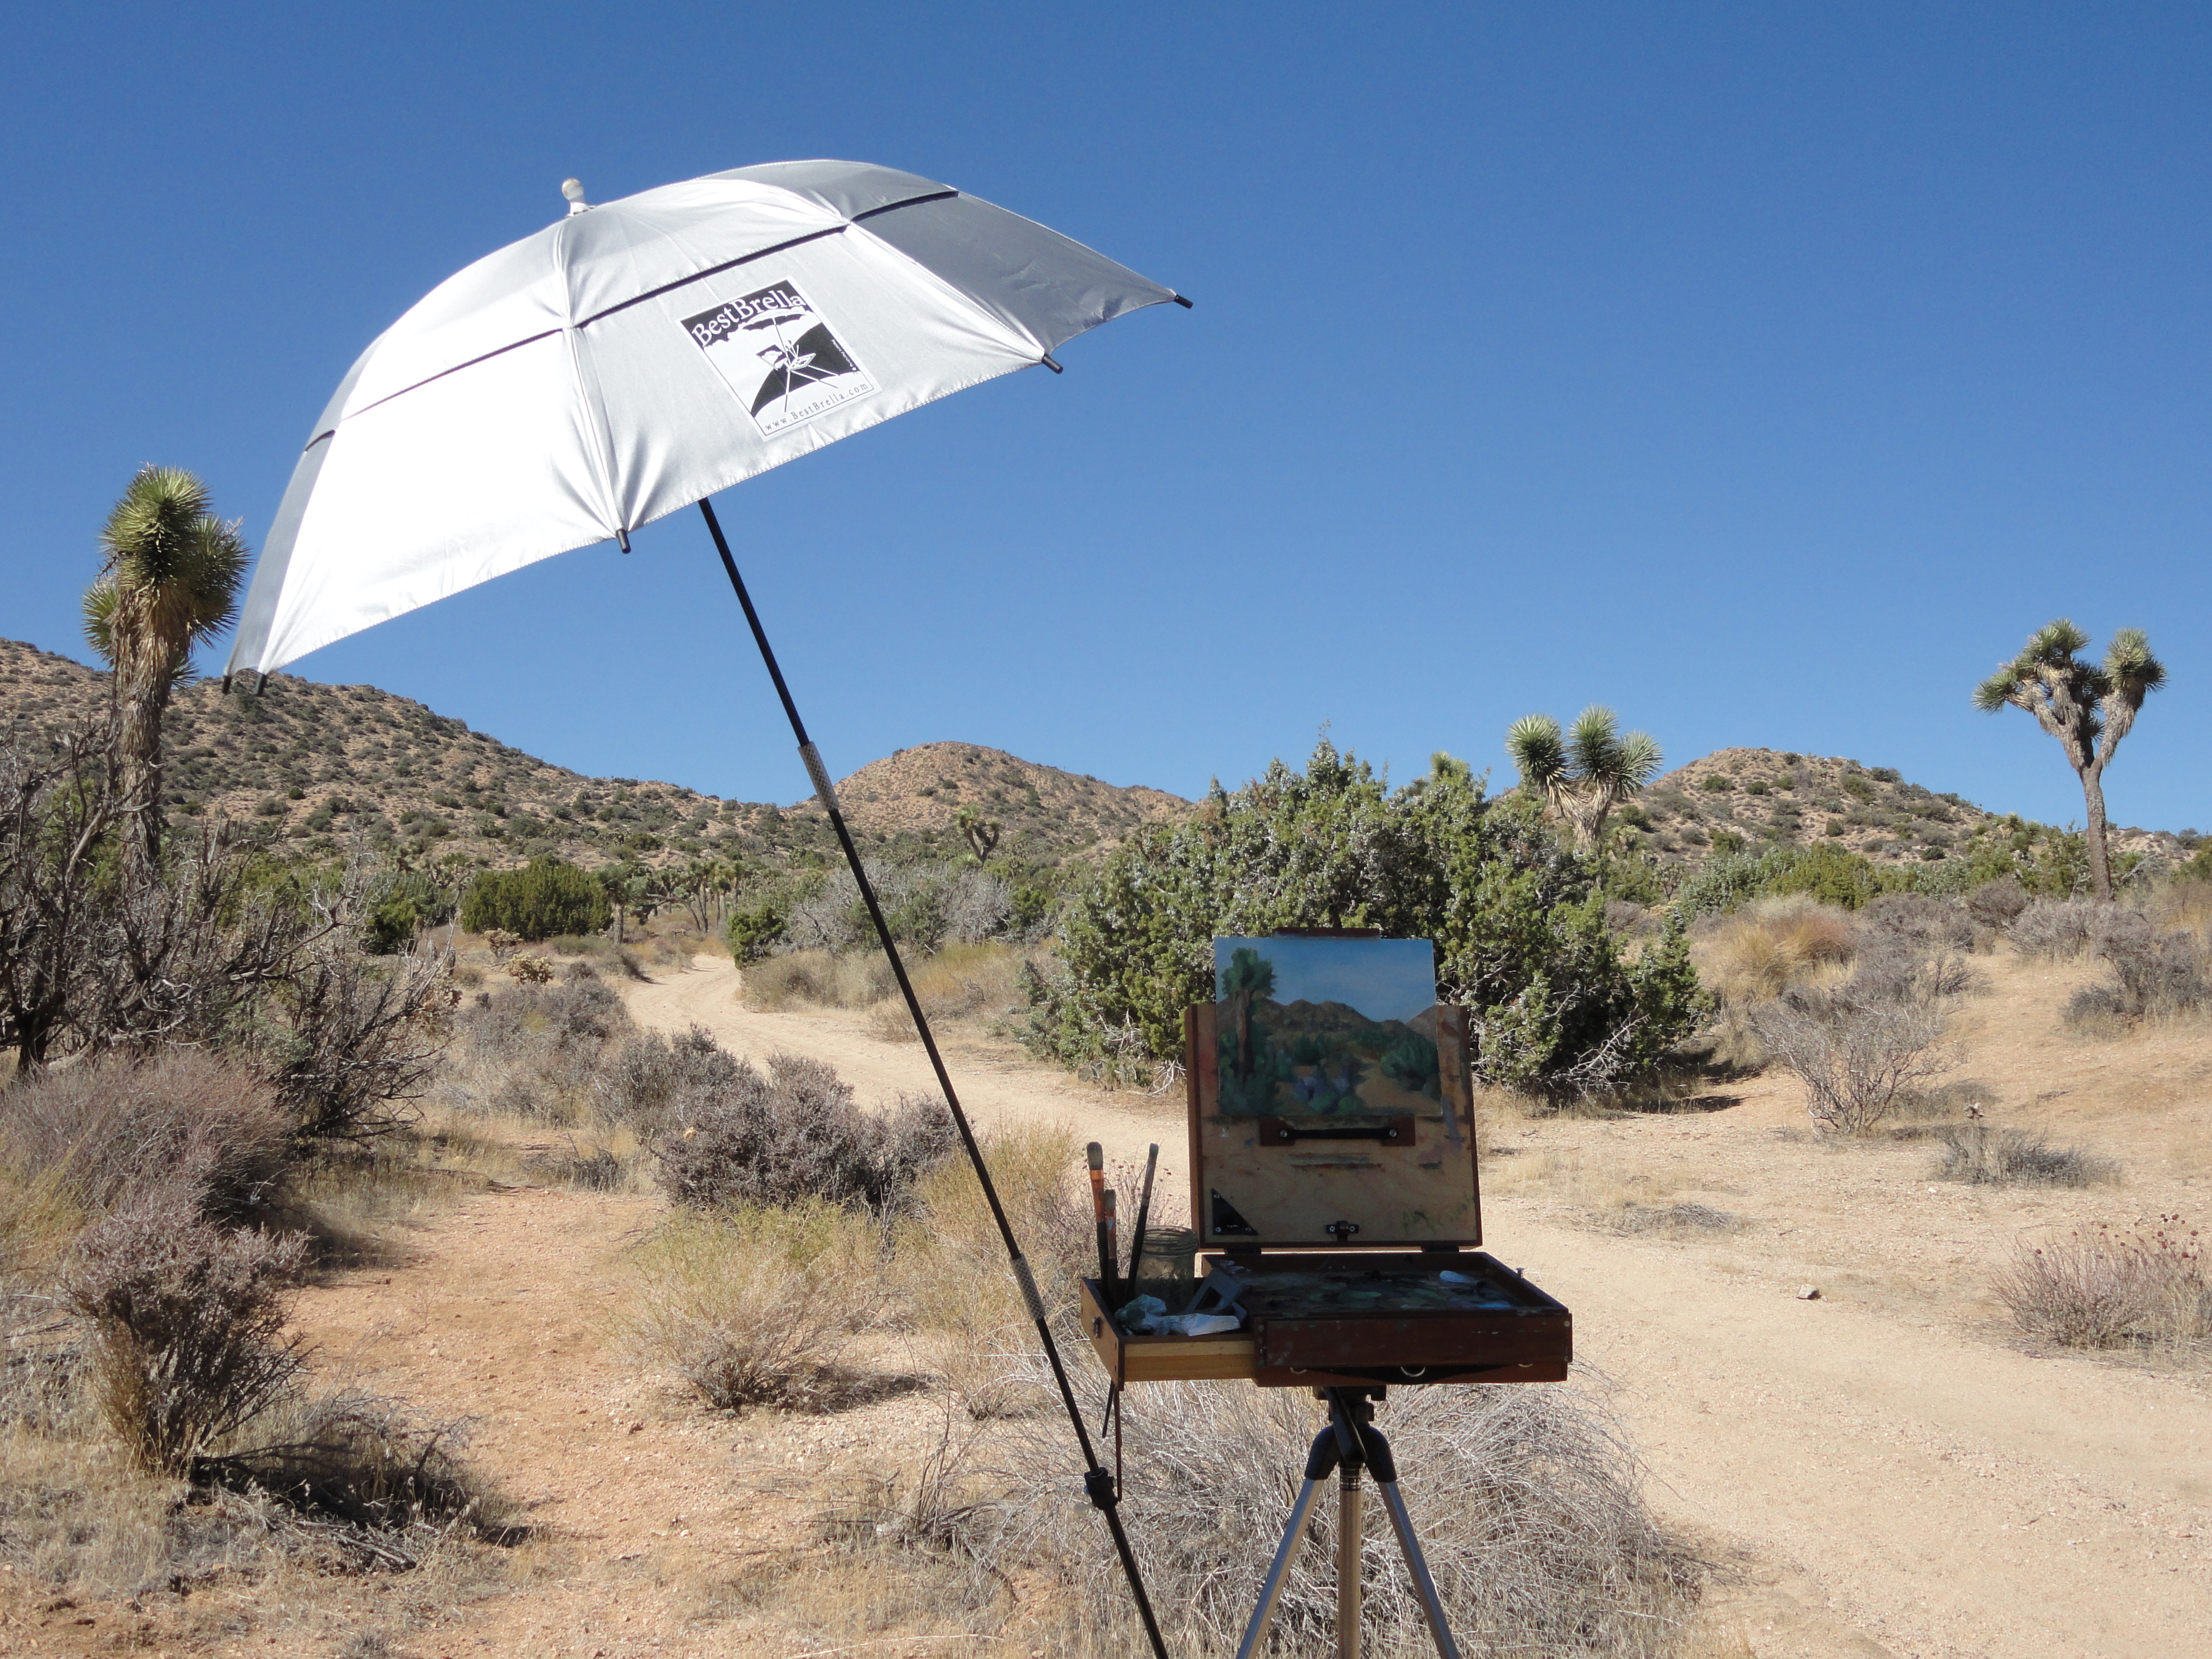 What You Will Need to Start Plein Air Painting